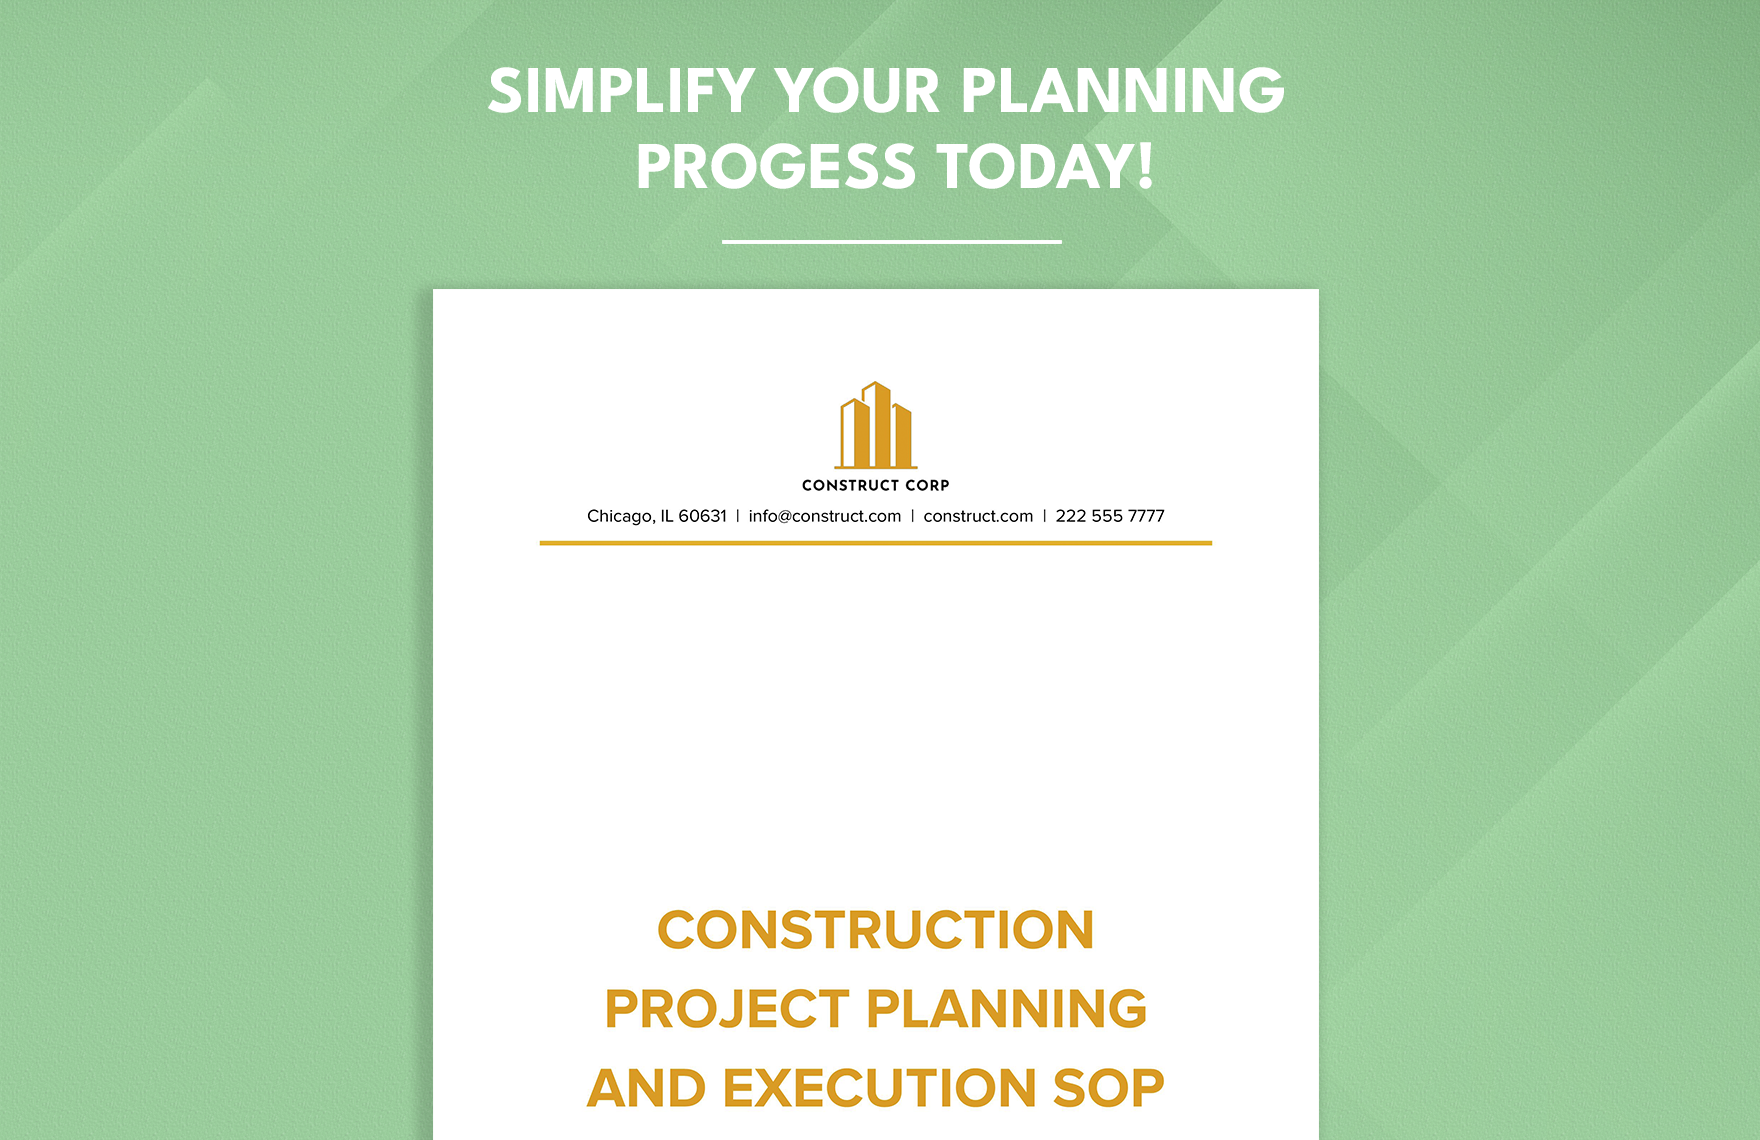 Construction Project Planning and Execution SOP